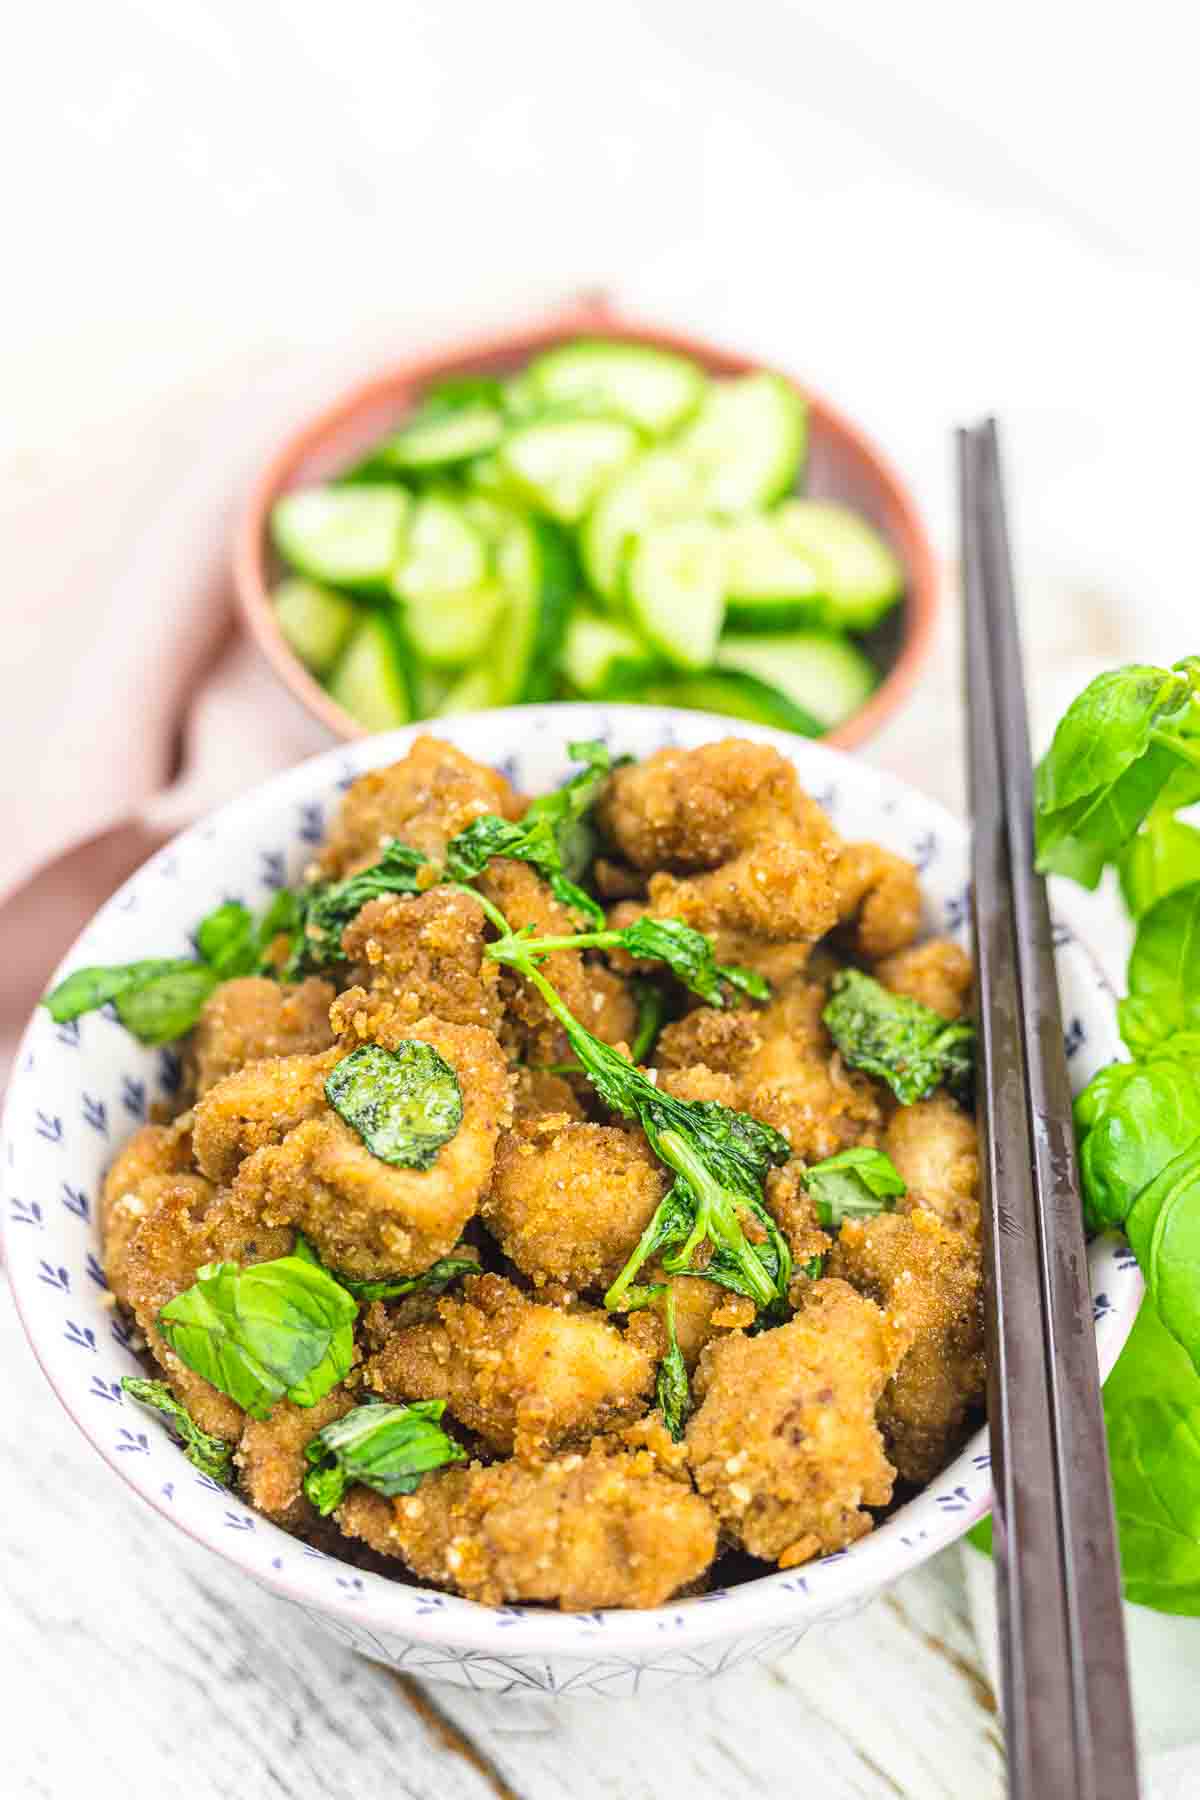 A bowl of crispy fried chicken with basil.